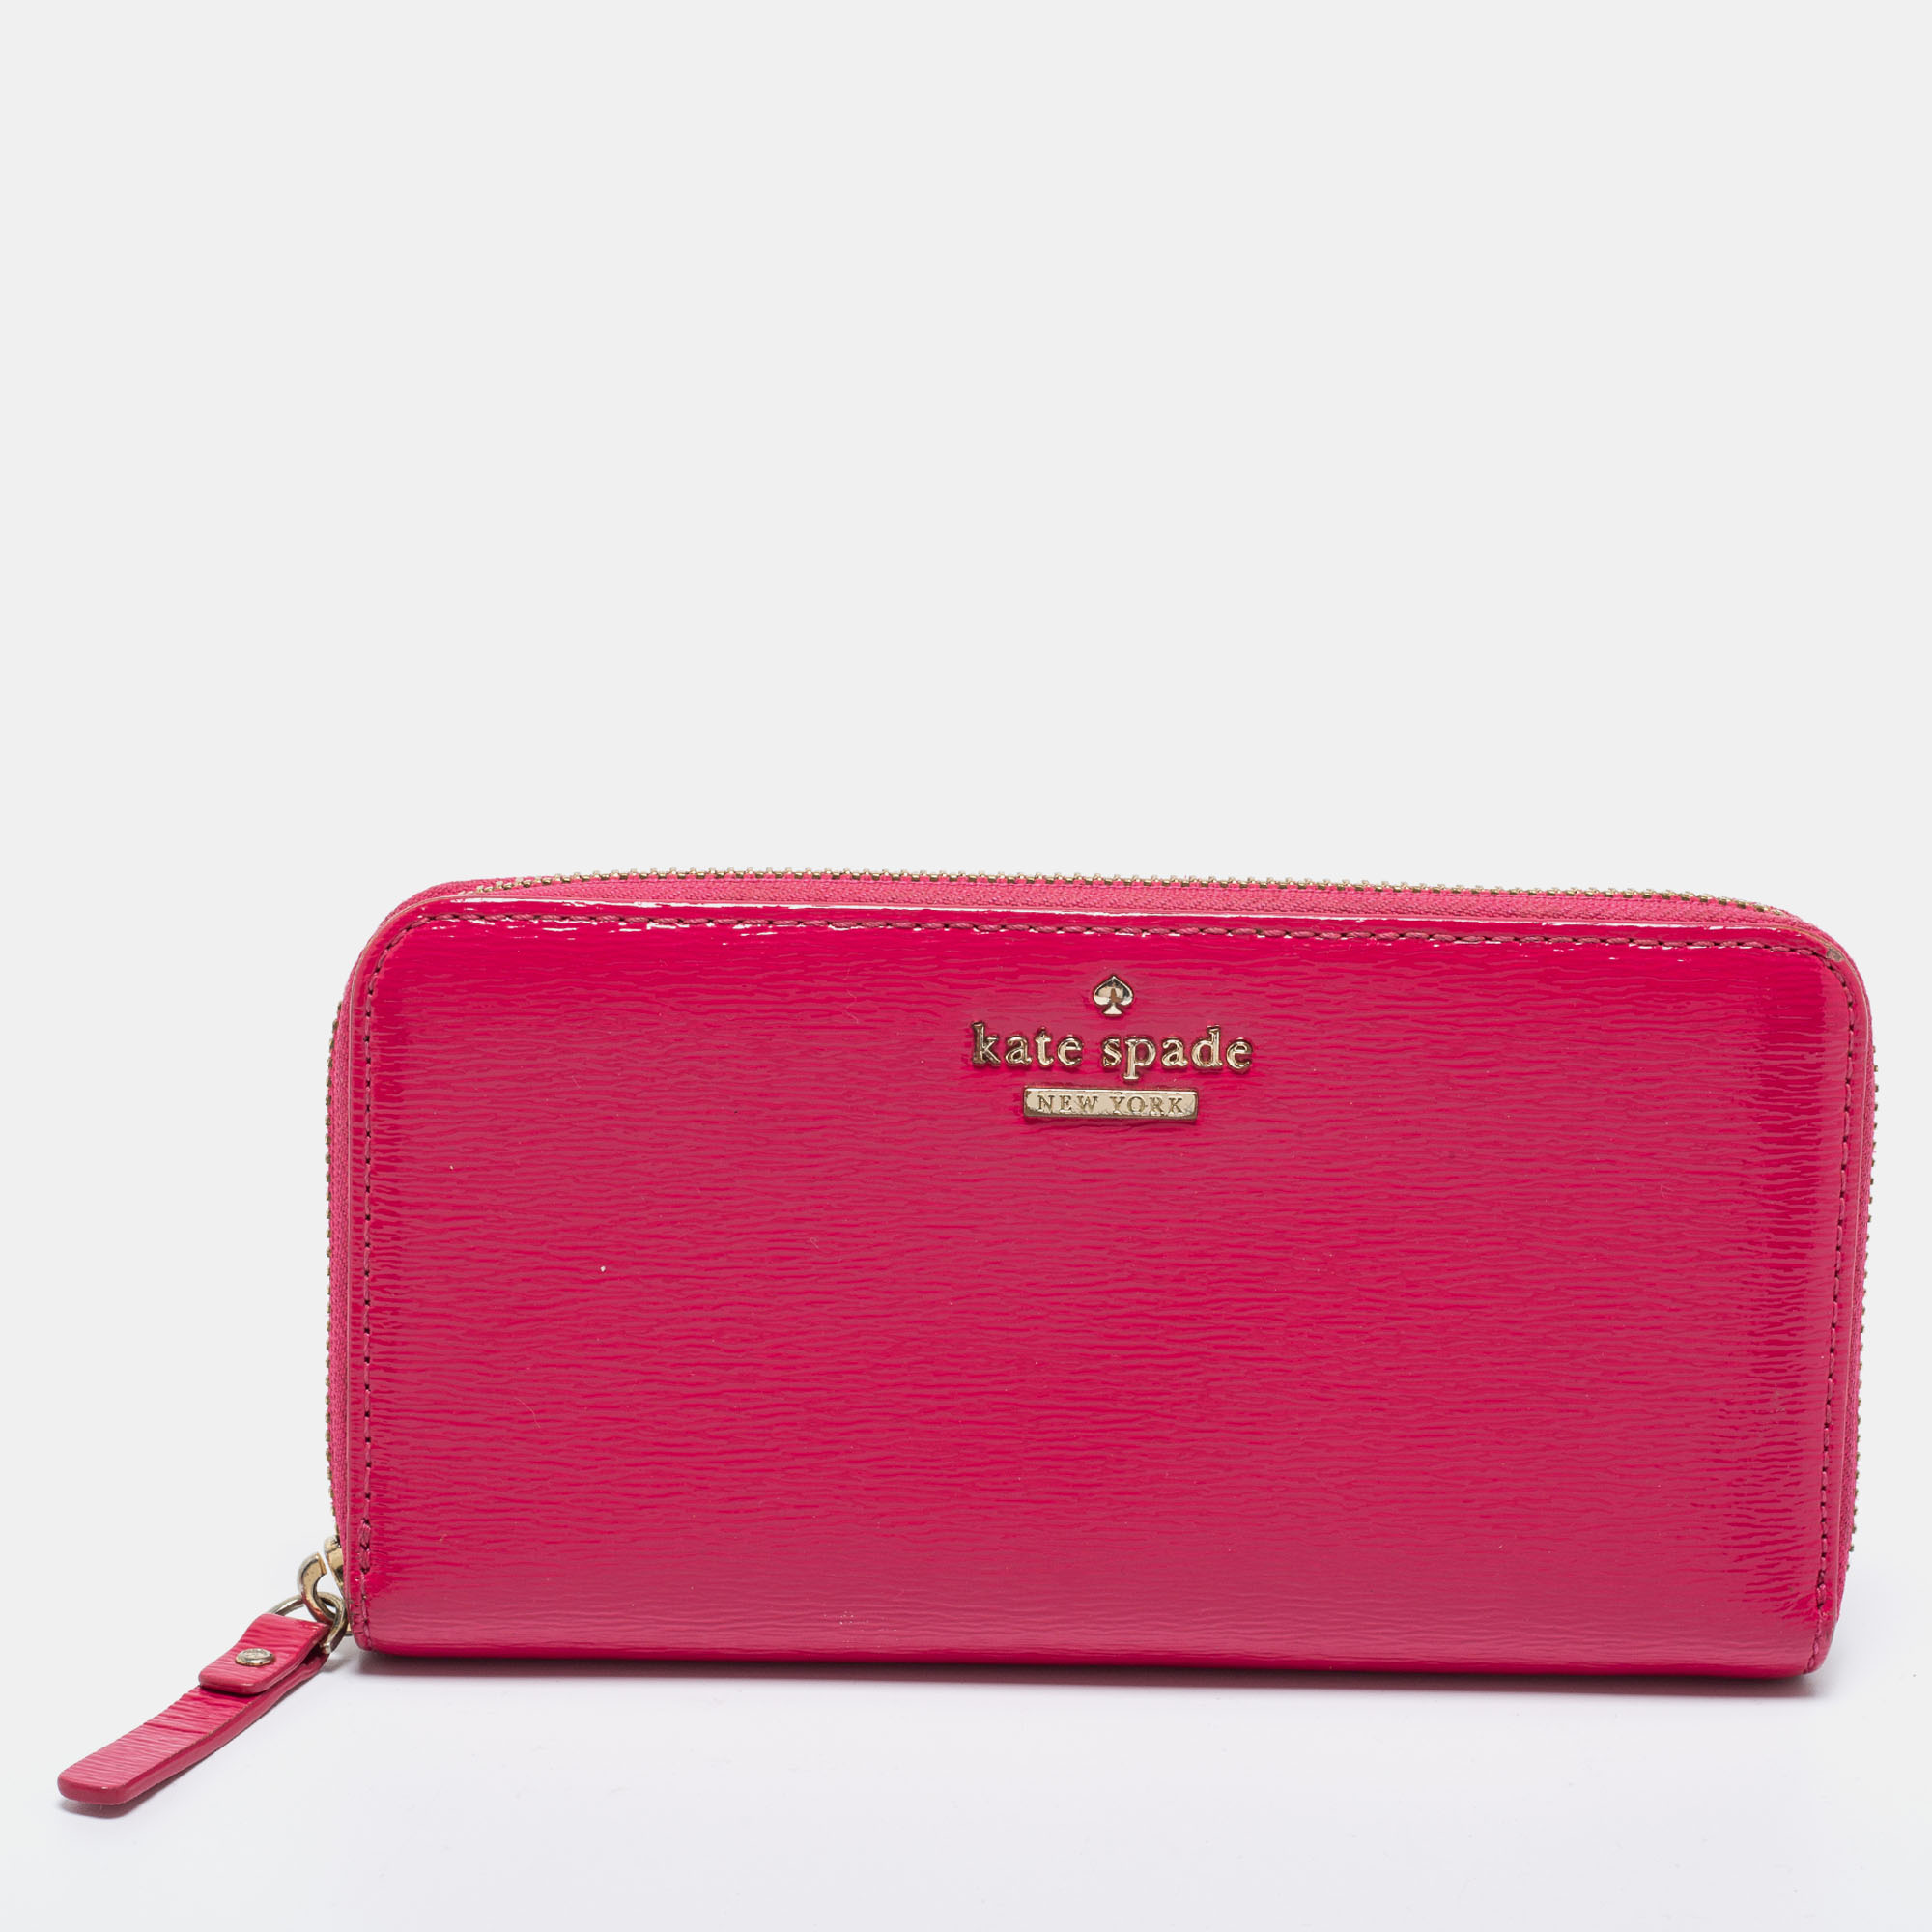 Pre-owned Kate Spade Pink Patent Leather Zip Around Wallet